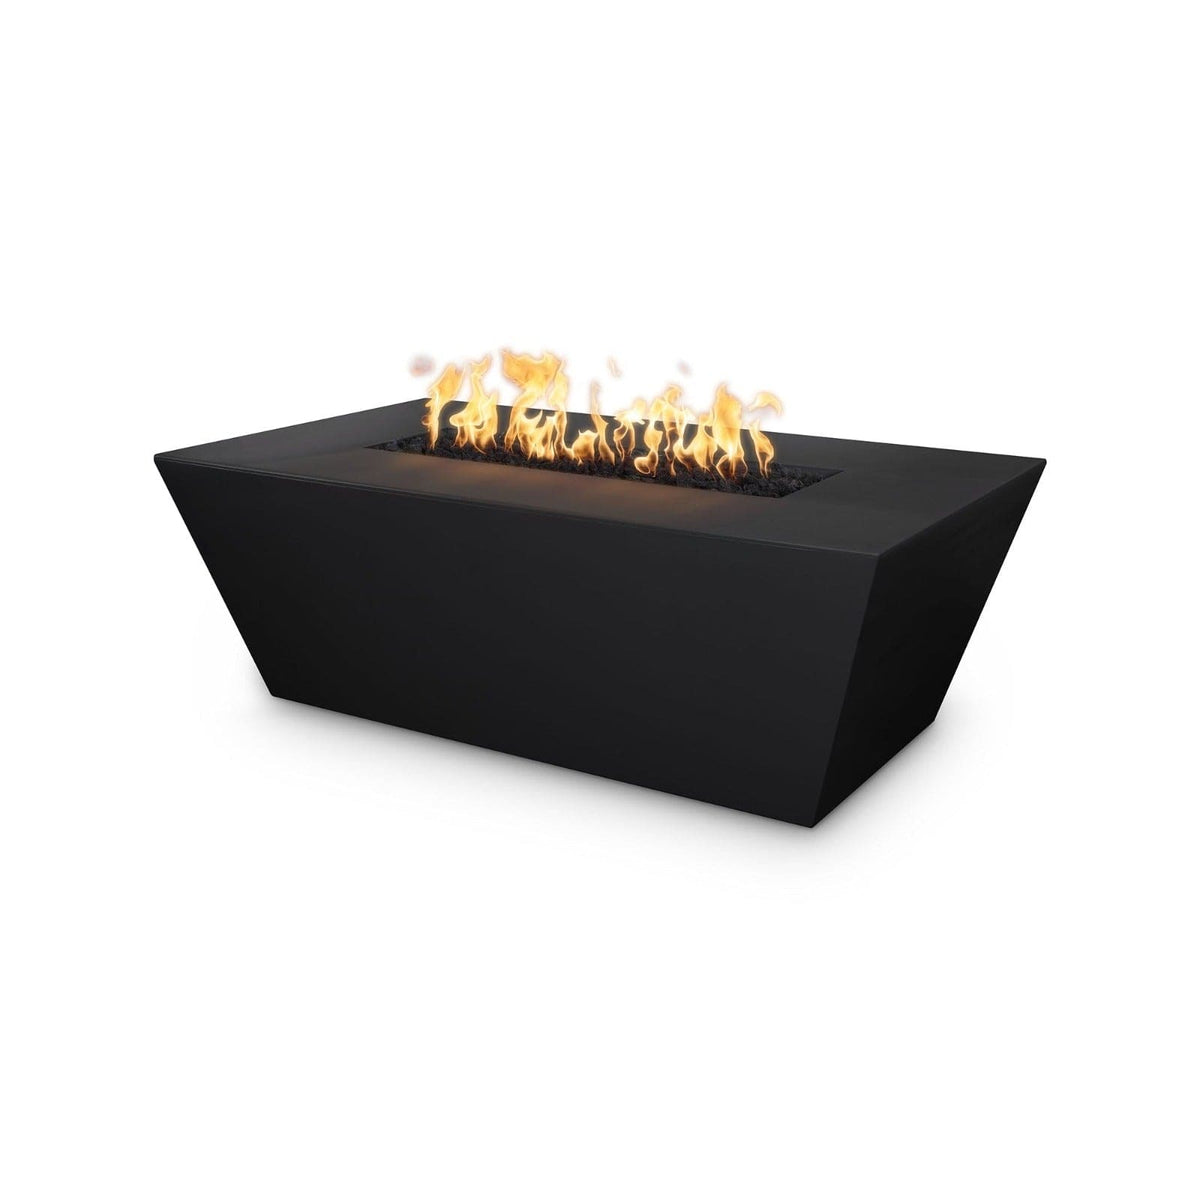 The Outdoor Plus Fire Features Black (-BLK) / Match Lit Ignition / Liquid Propane The Outdoor Plus 60&quot; Rectangular Angelus Fire Pit in Solid Concrete Finishes - GFRC Concrete / OPT-AGLGF60, OPT-AGLGF60FSML, OPT-AGLGF60FSEN, OPT-AGLGF60E12V, OPT-AGLGF60EKIT